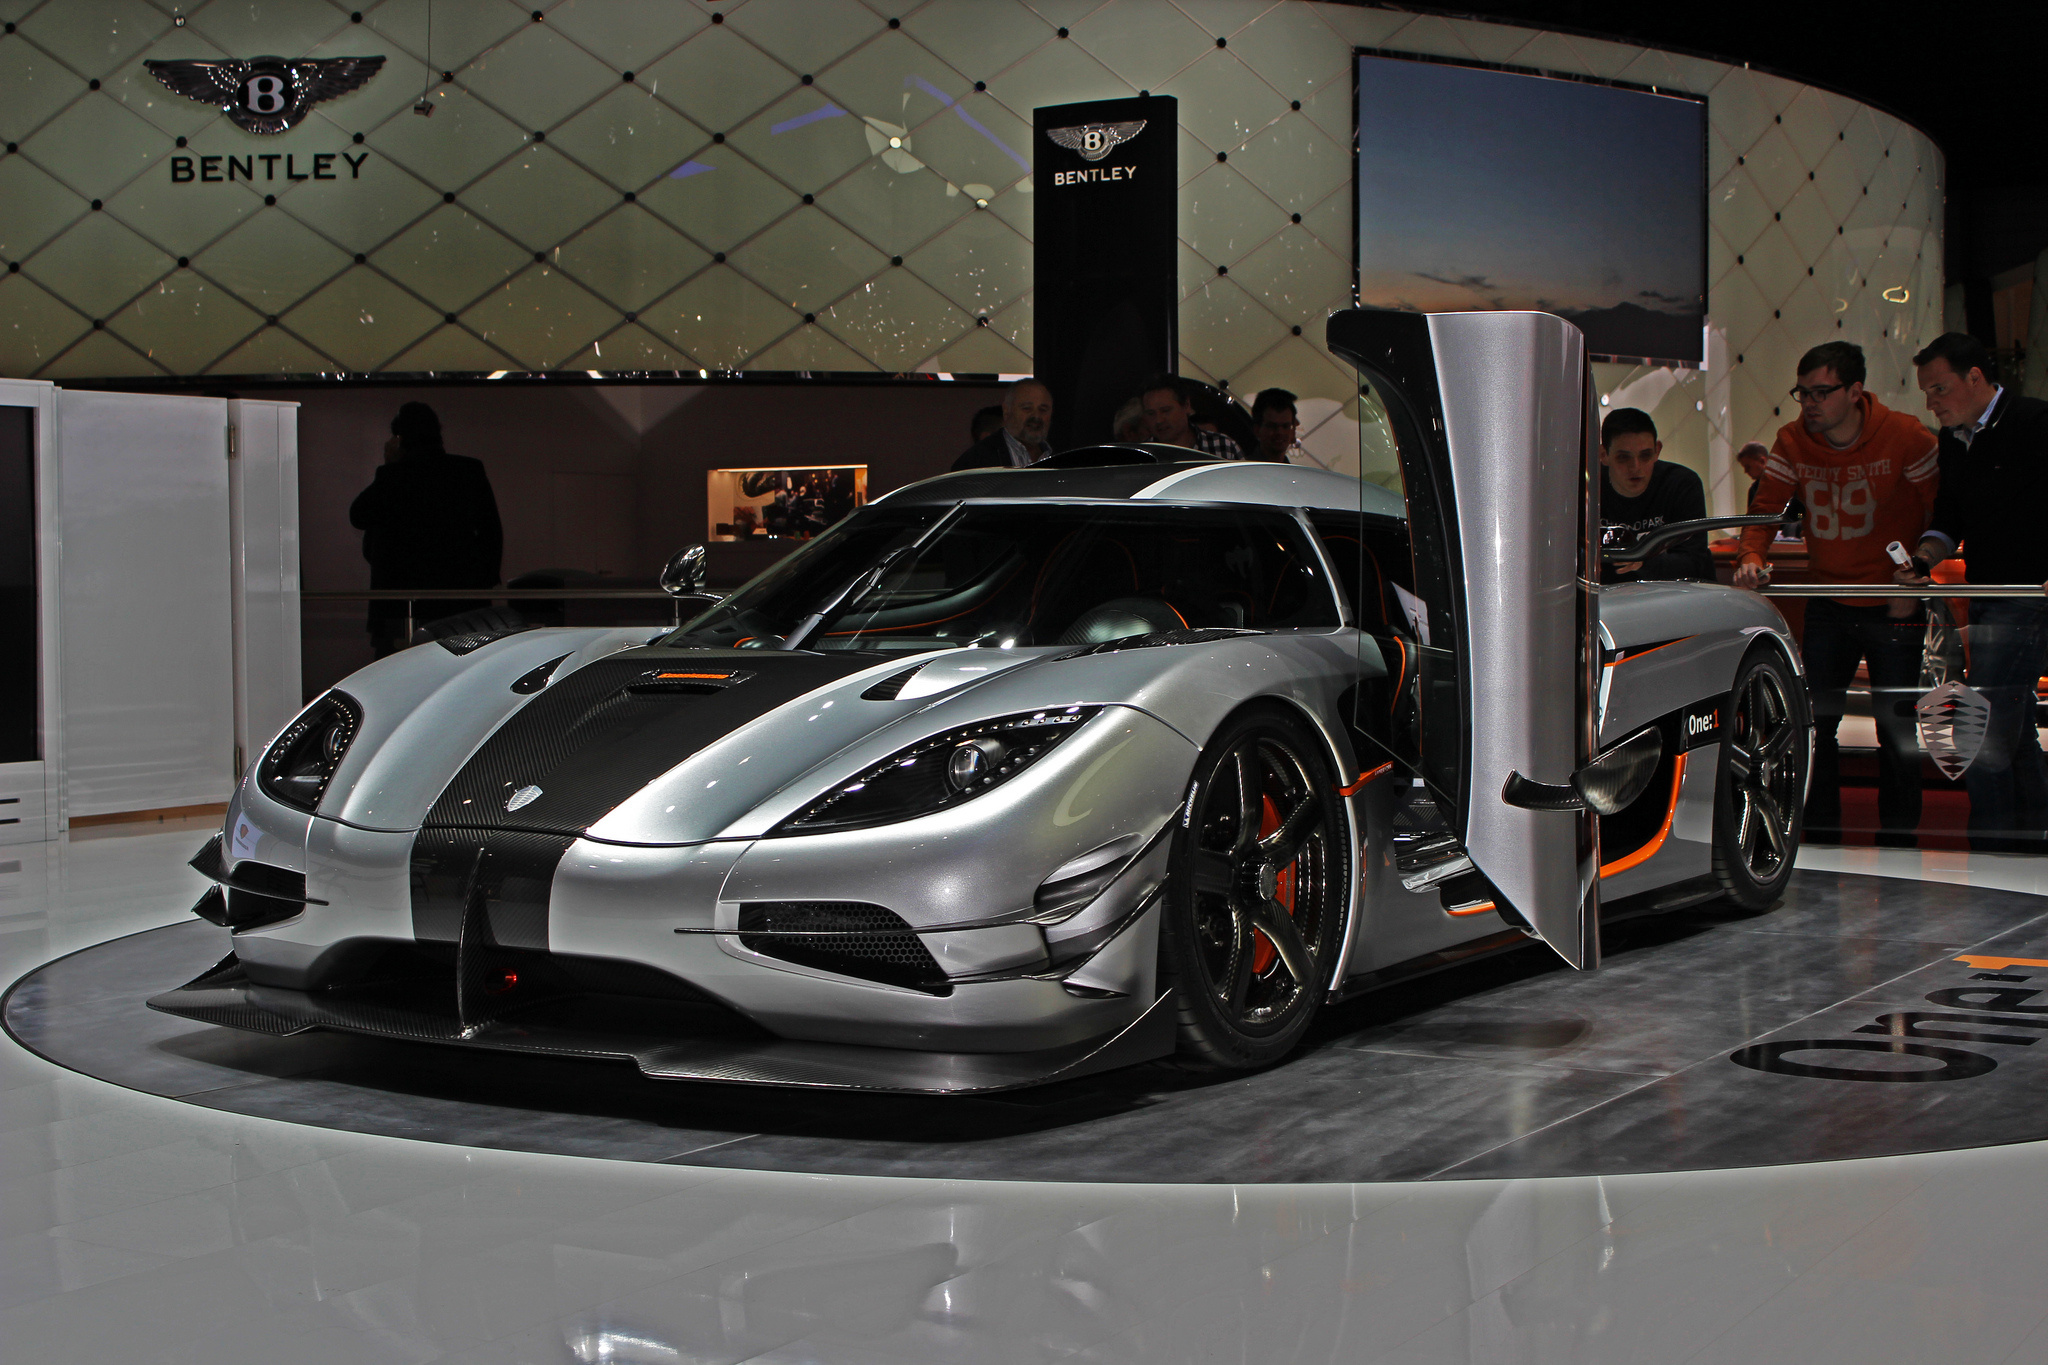 72067 download wallpaper car showroom, koenigsegg, cars, 2014, motor show, hypercar, one 1, geneva screensavers and pictures for free